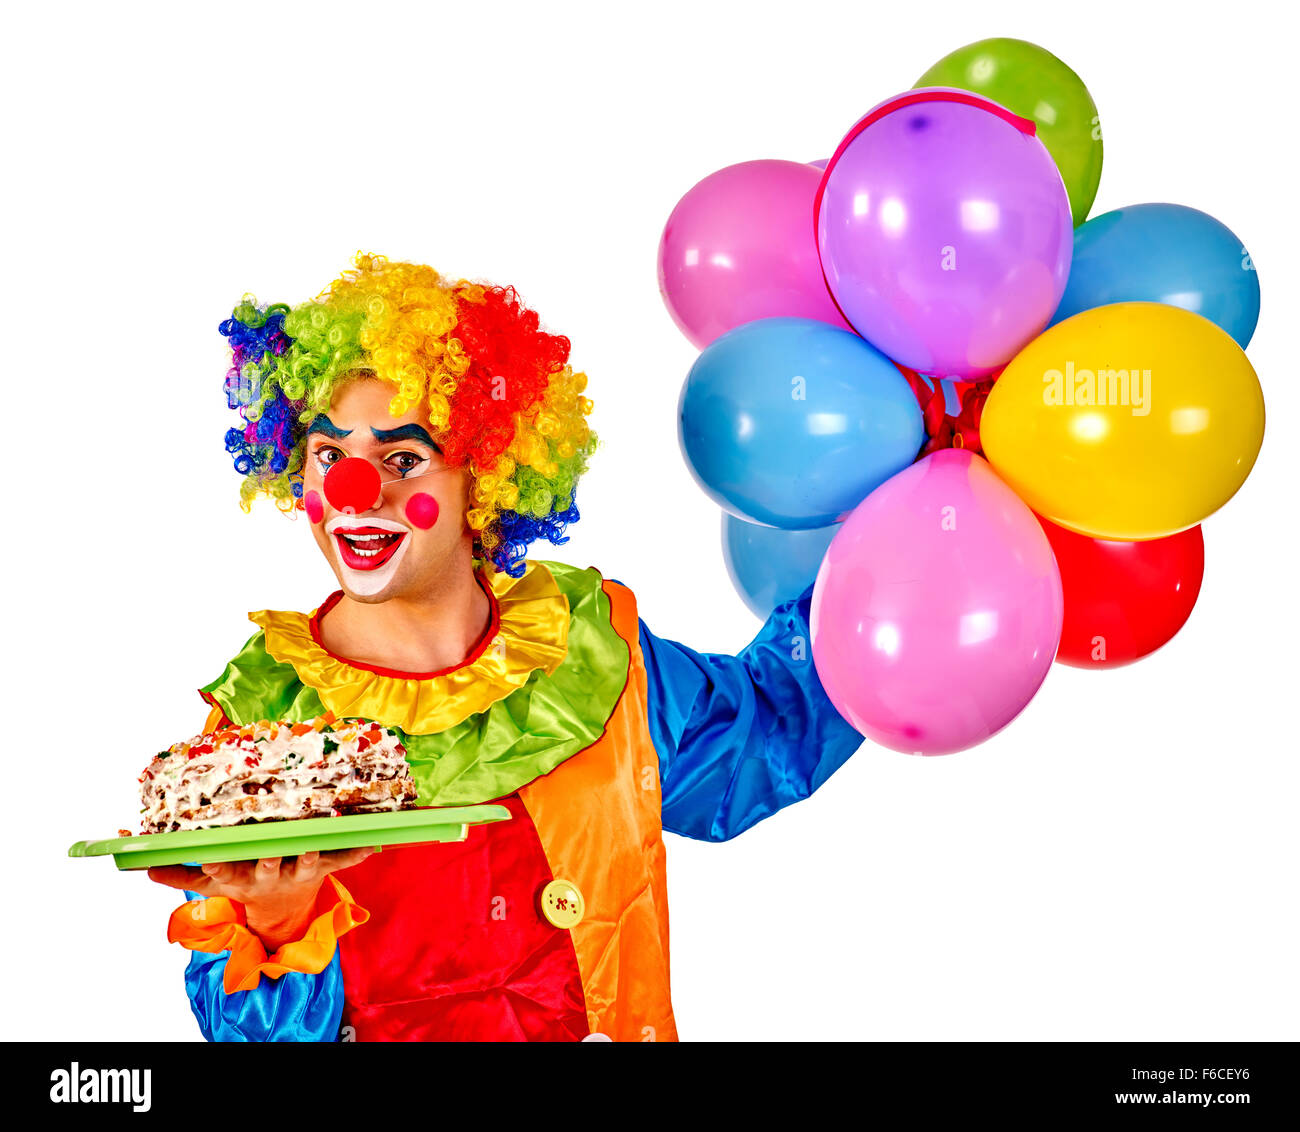 Happy birthday clown holding a bunch of balloons Stock Photo - Alamy